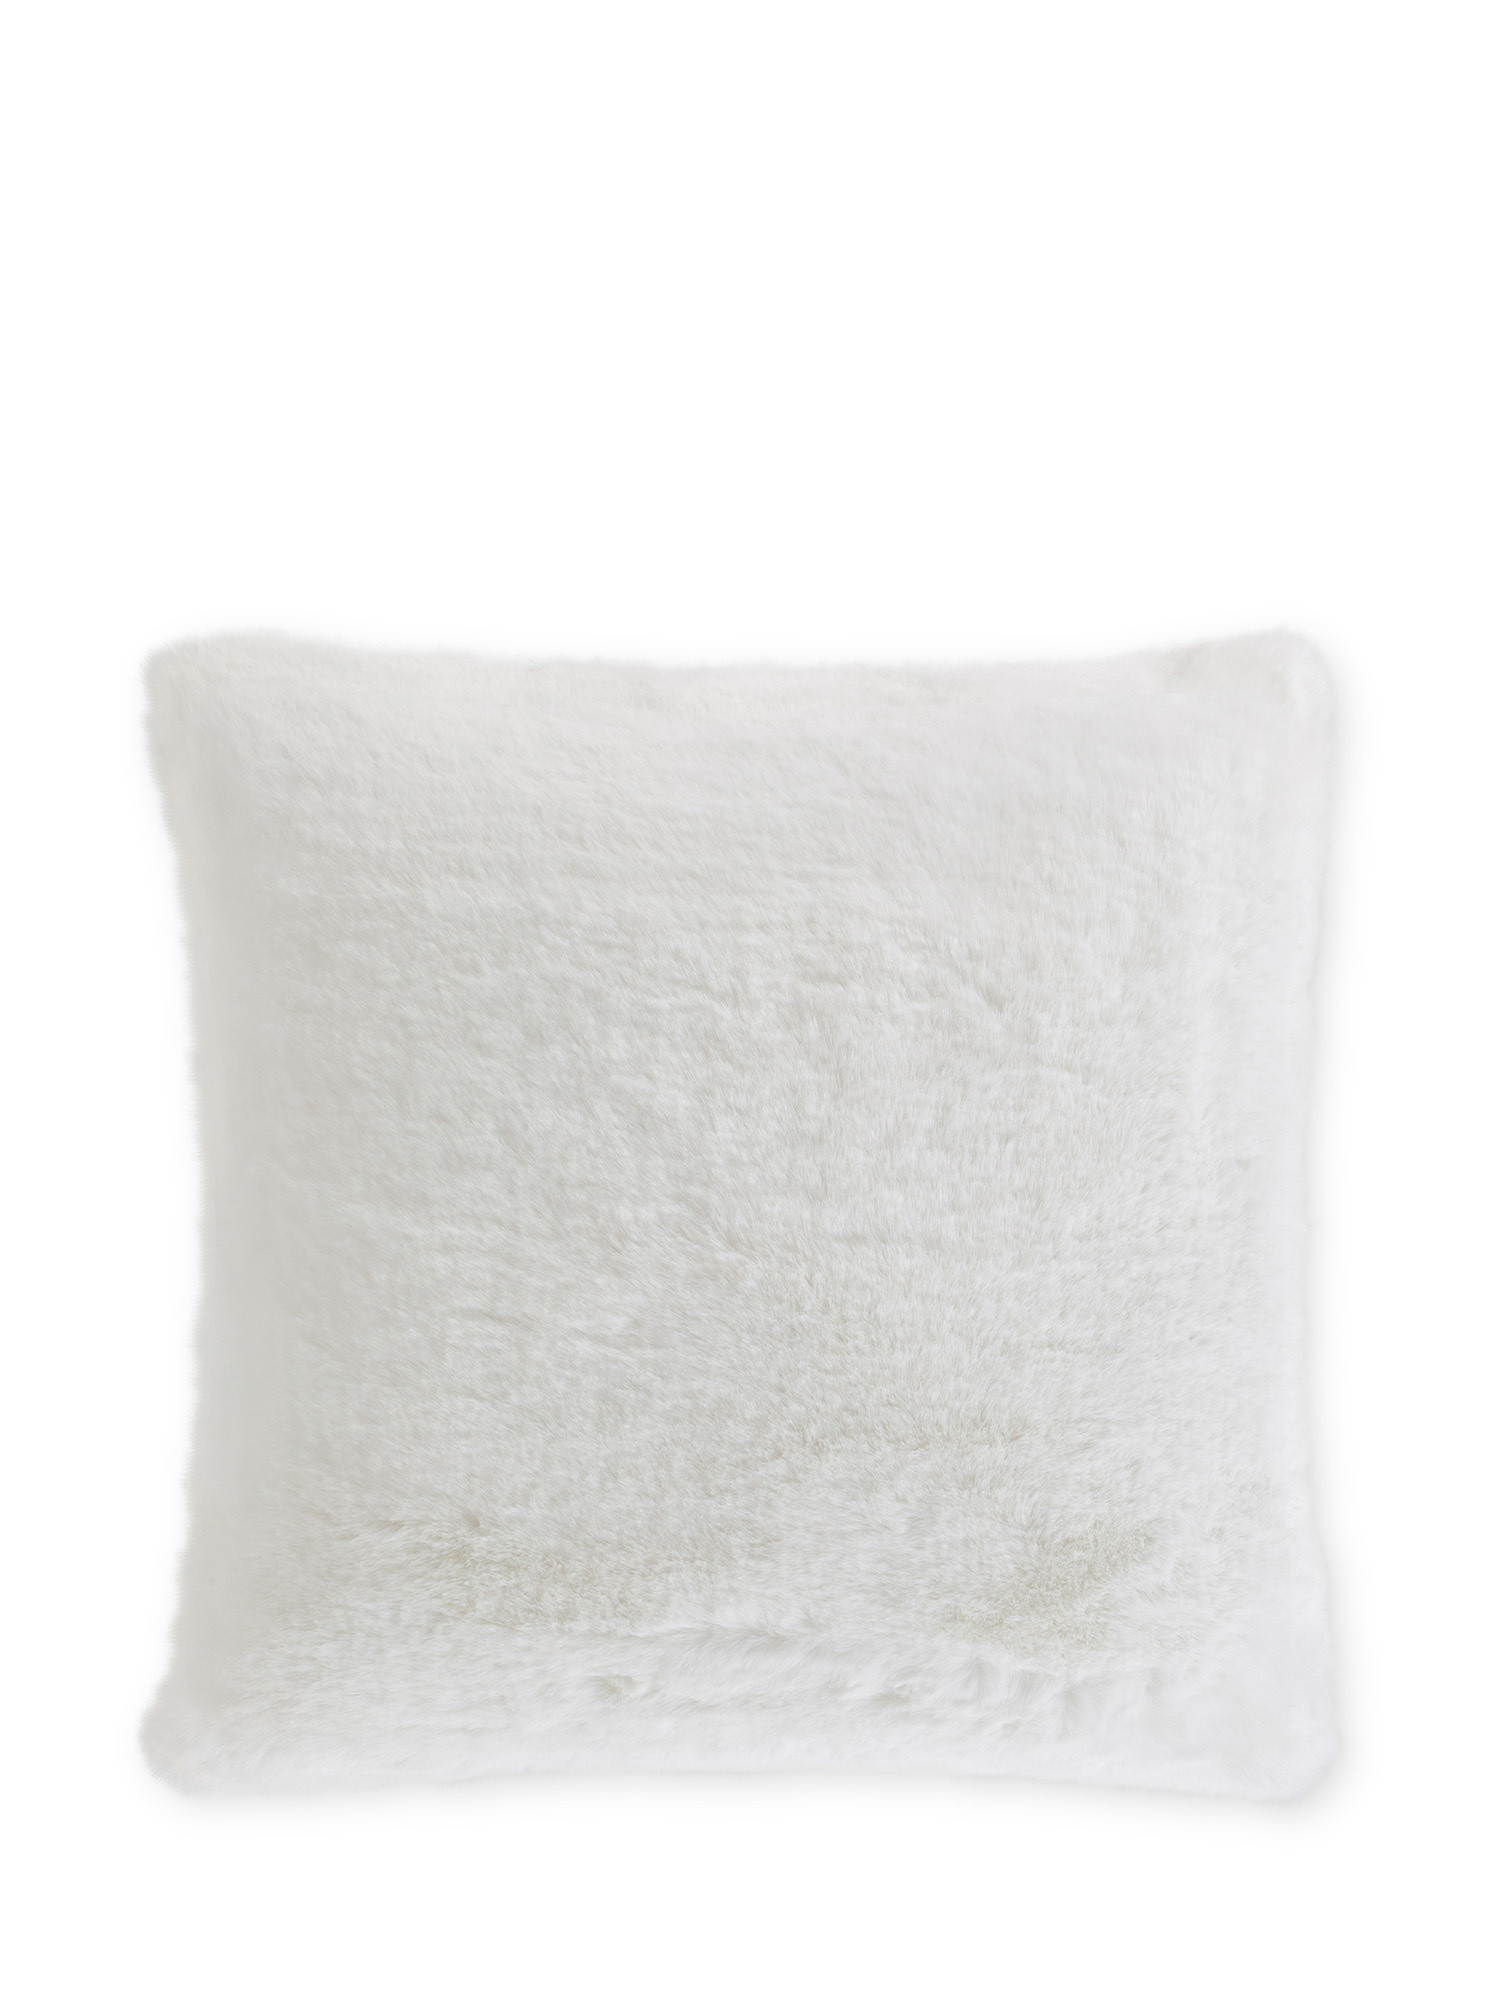 Solid color eco-fur cushion 45x45 cm, White, large image number 0